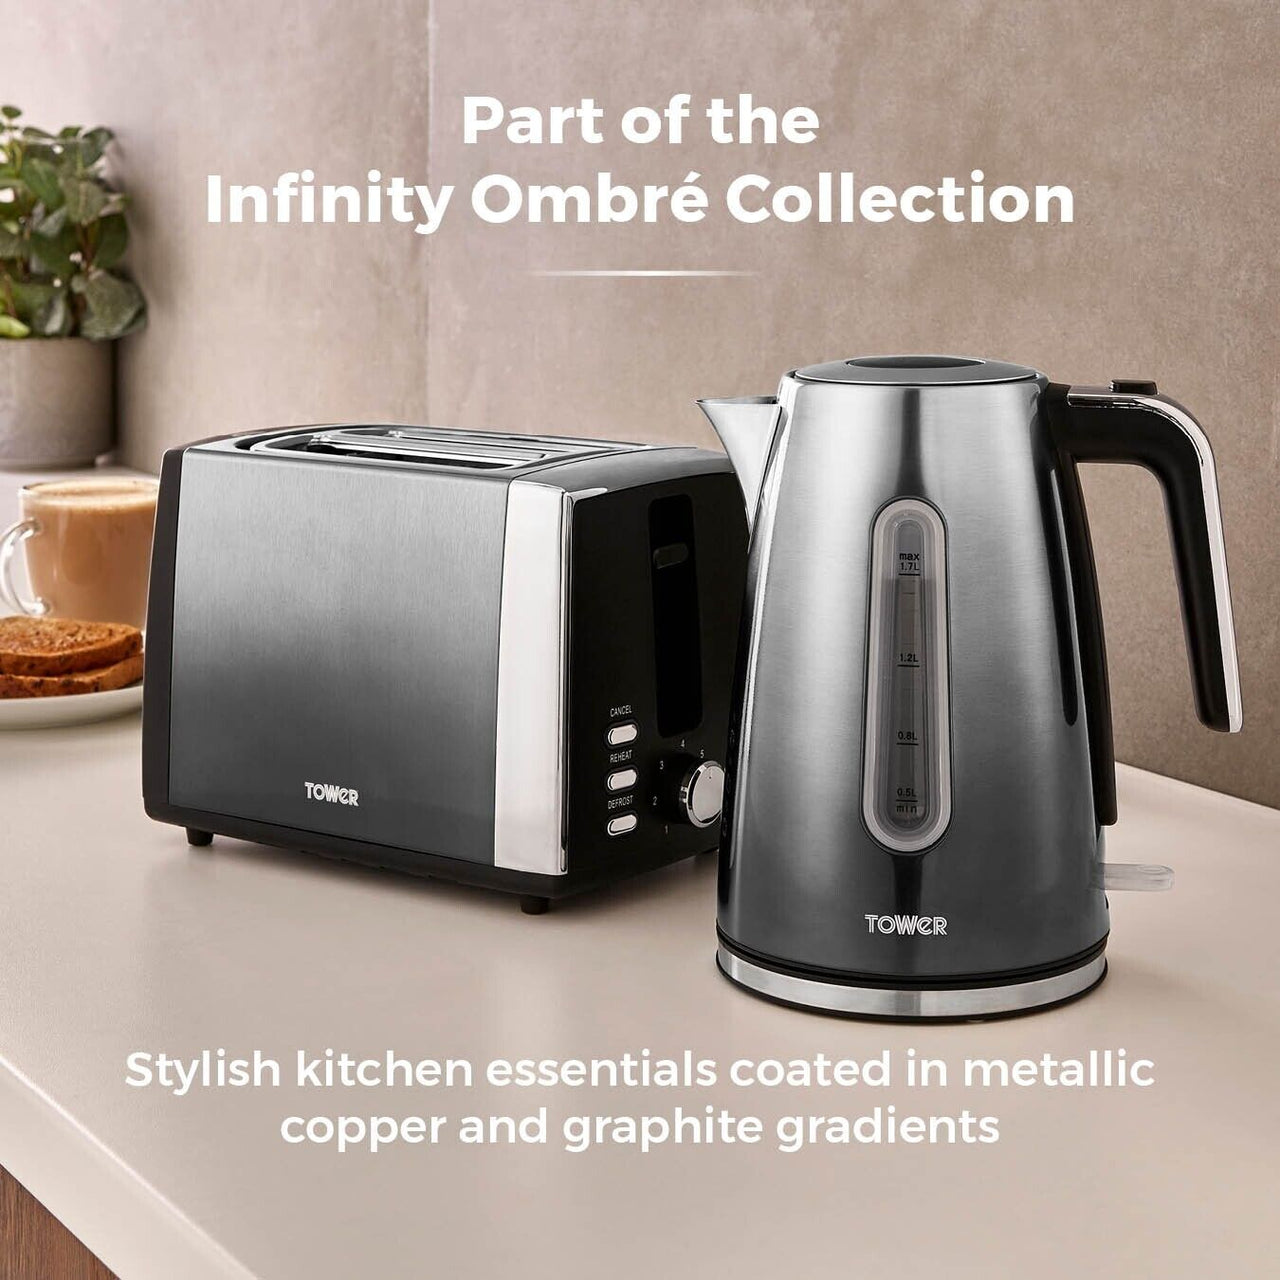 Tower Infinity Ombre 3KW 1.7L Kettle & 2 Slice Matching Toaster Set in Graphite